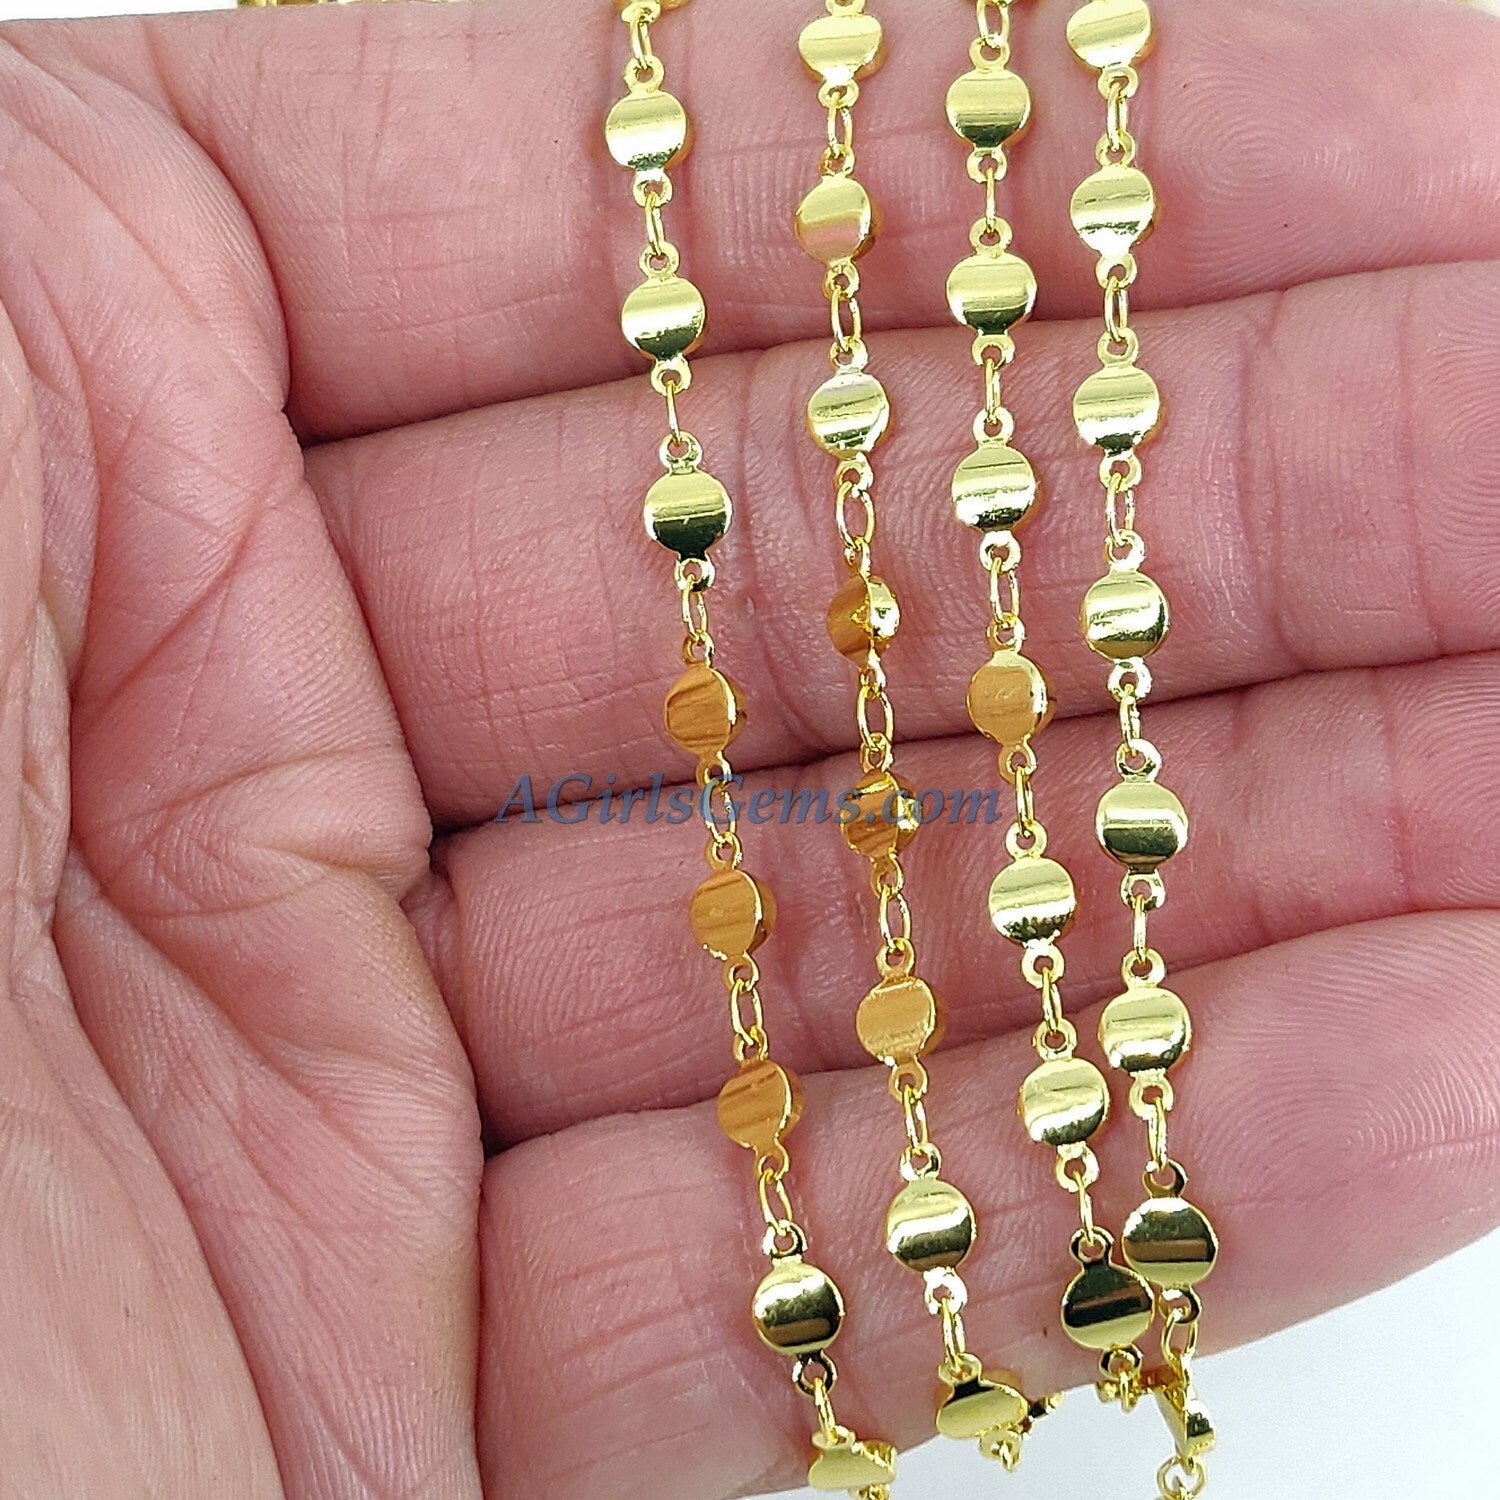 Silver Beaded Rosary Chain, Jewelry 4 mm Oblong Oval Metal Beaded Flat Moroccan Style Beads CH #228, Soldered Links Gold/Silver Plated